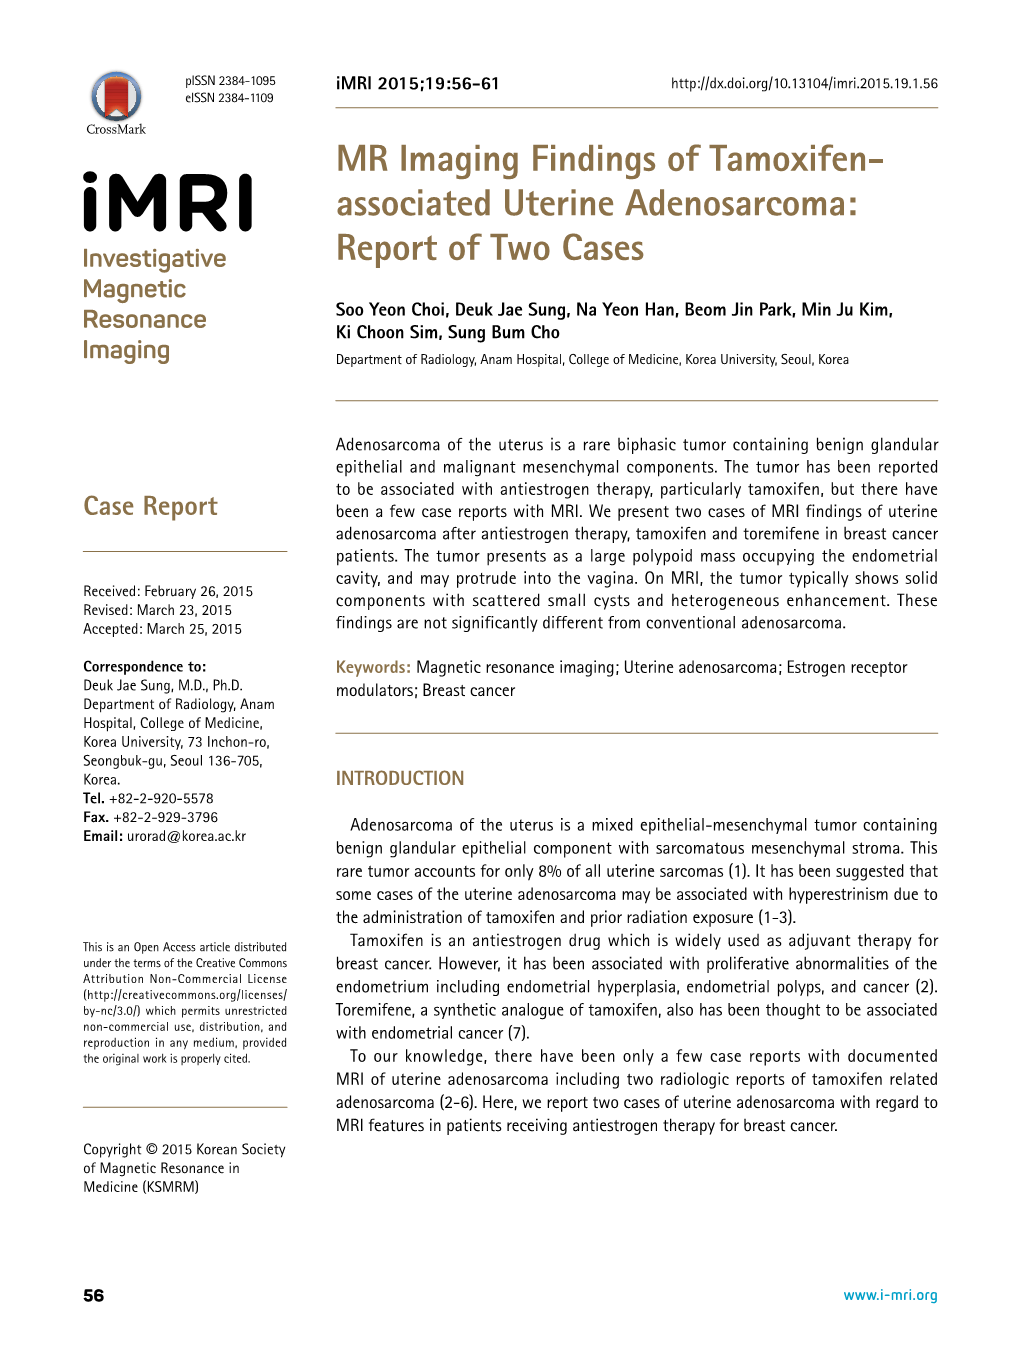 MR Imaging Findings of Tamoxifen- Associated Uterine Adenosarcoma: Report of Two Cases